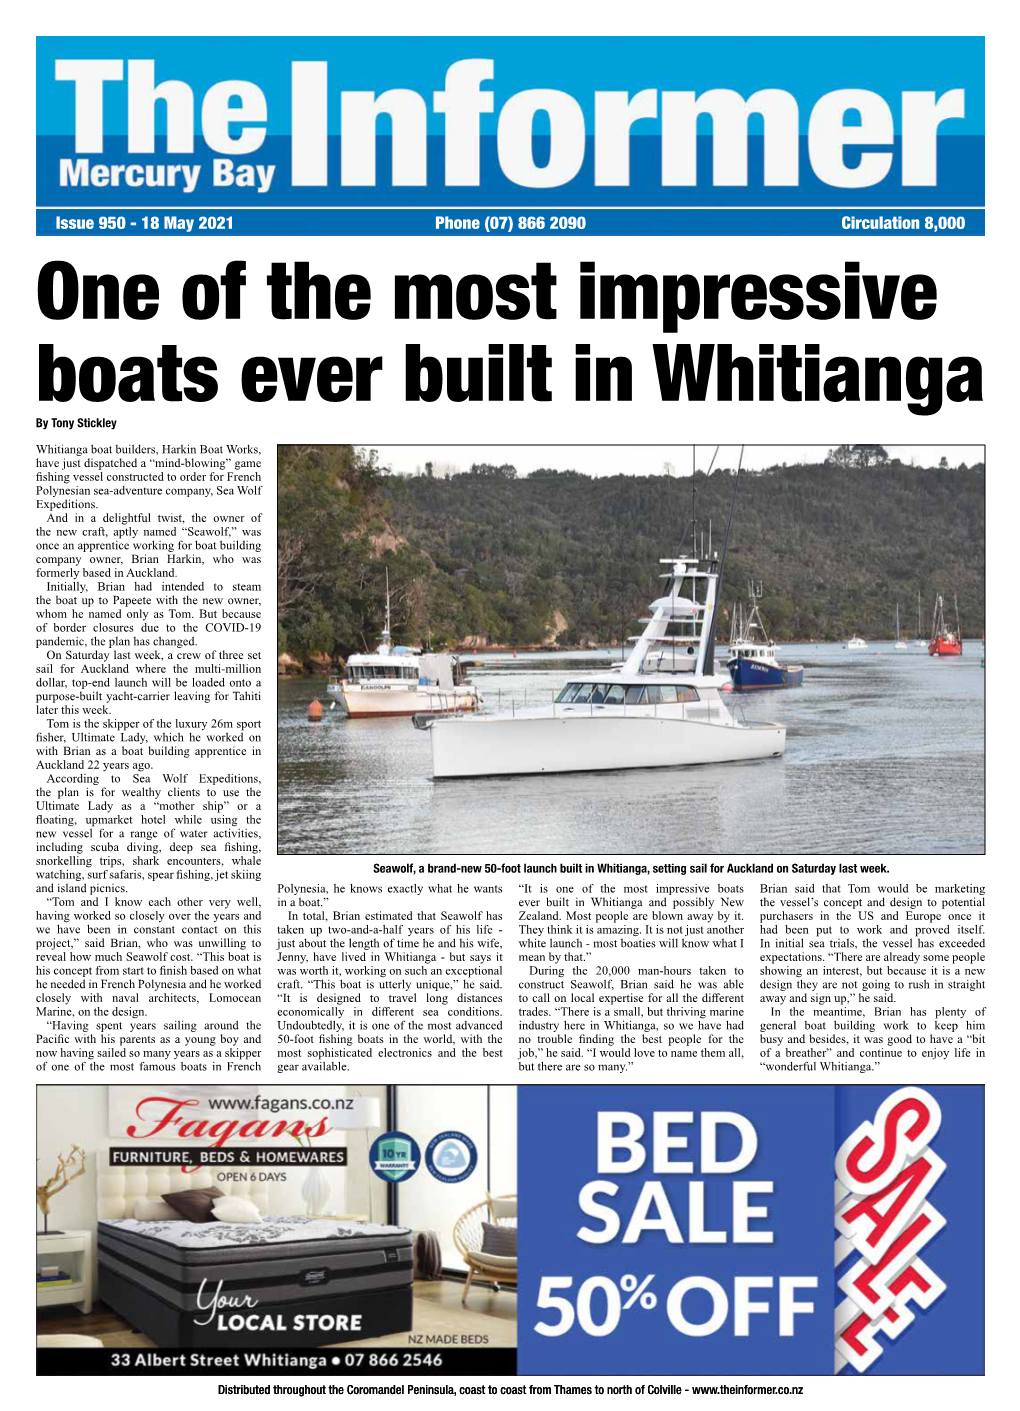 One of the Most Impressive Boats Ever Built in Whitianga by Tony Stickley